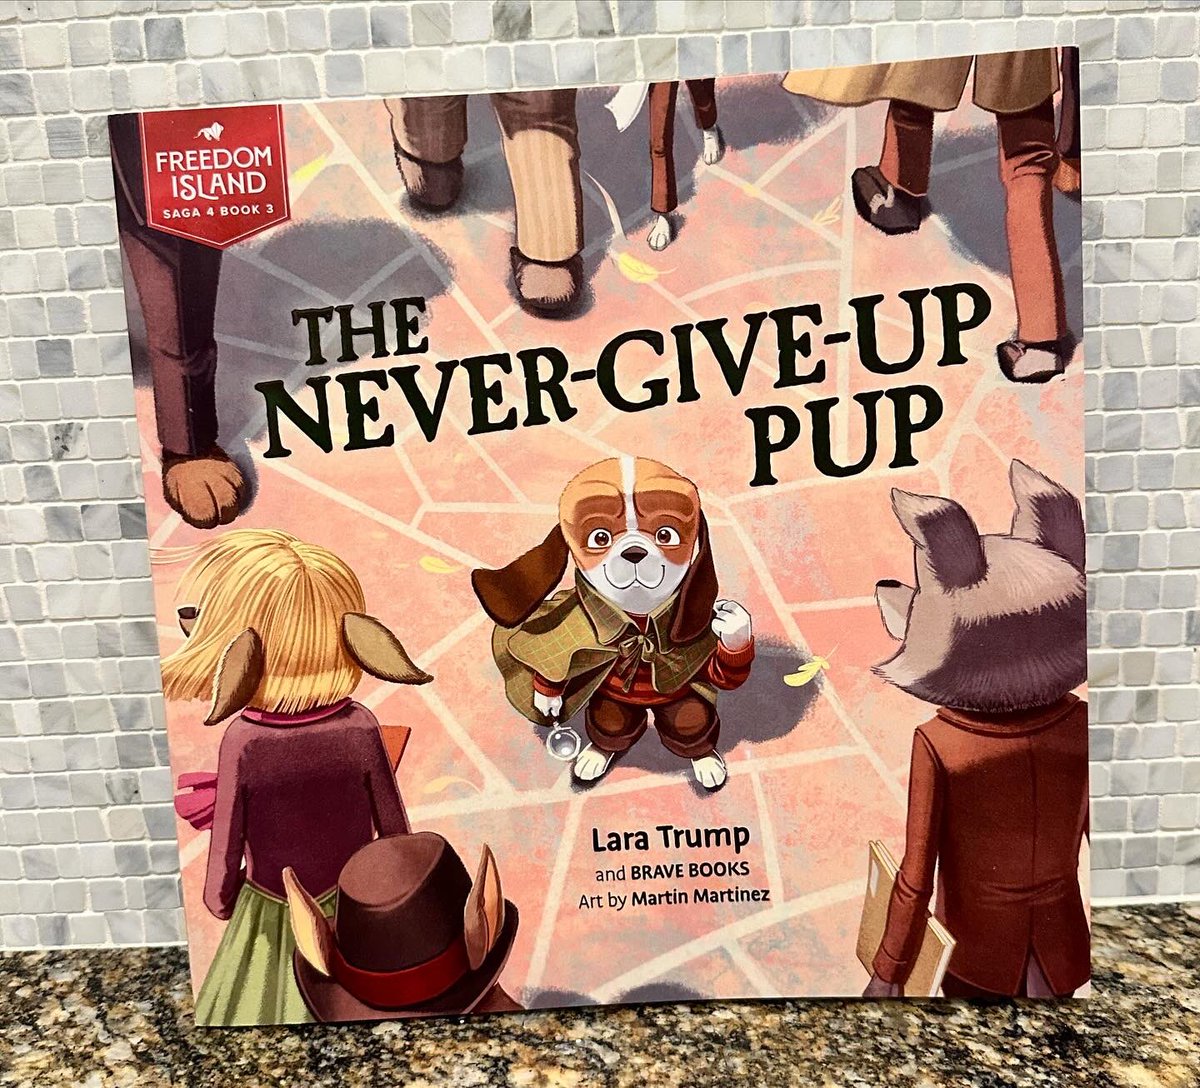 Very excited to announce the launch of my @BraveBooksUS children’s book, The Never-Give-Up Pup! A book about perseverance, work ethic and NEVER GIVING UP!!! A great lesson for today’s kids, young and old! 🐶📖link: bravebooks.us/products/the-n…